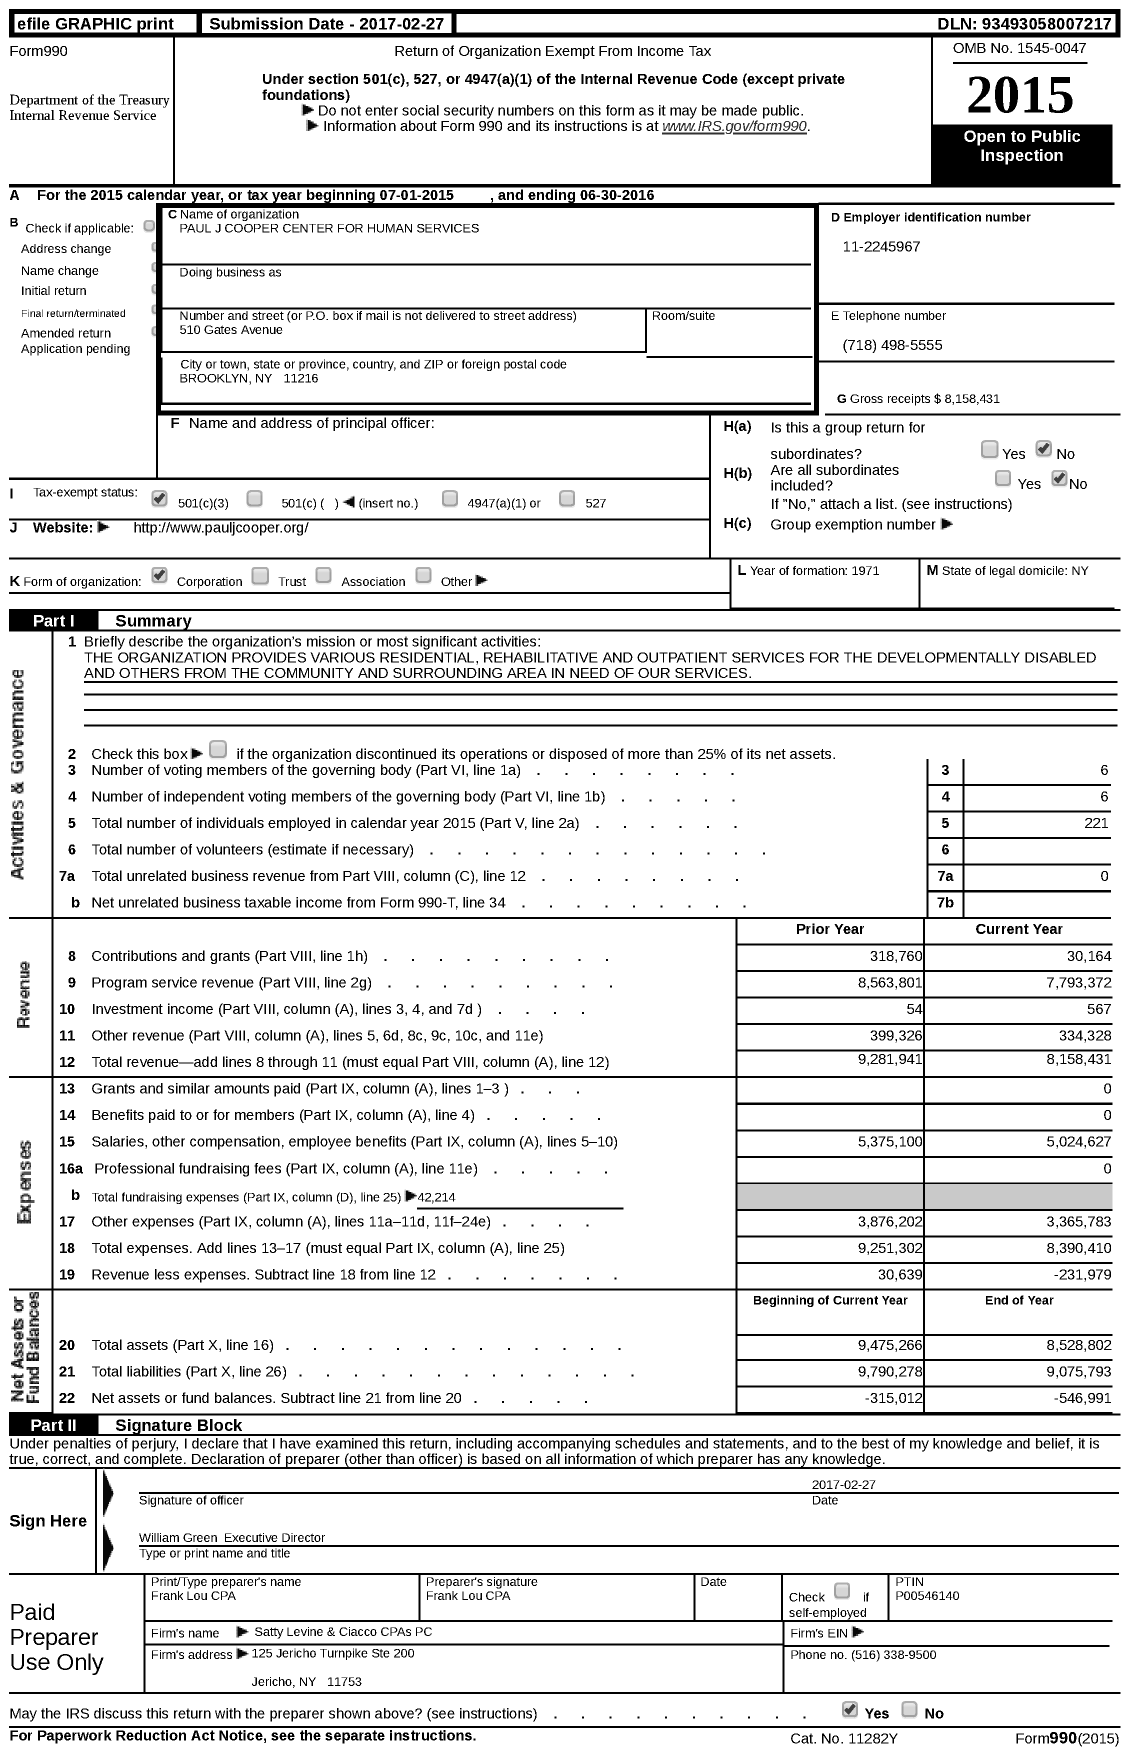 Image of first page of 2015 Form 990 for Paul J Cooper Center for Human Services